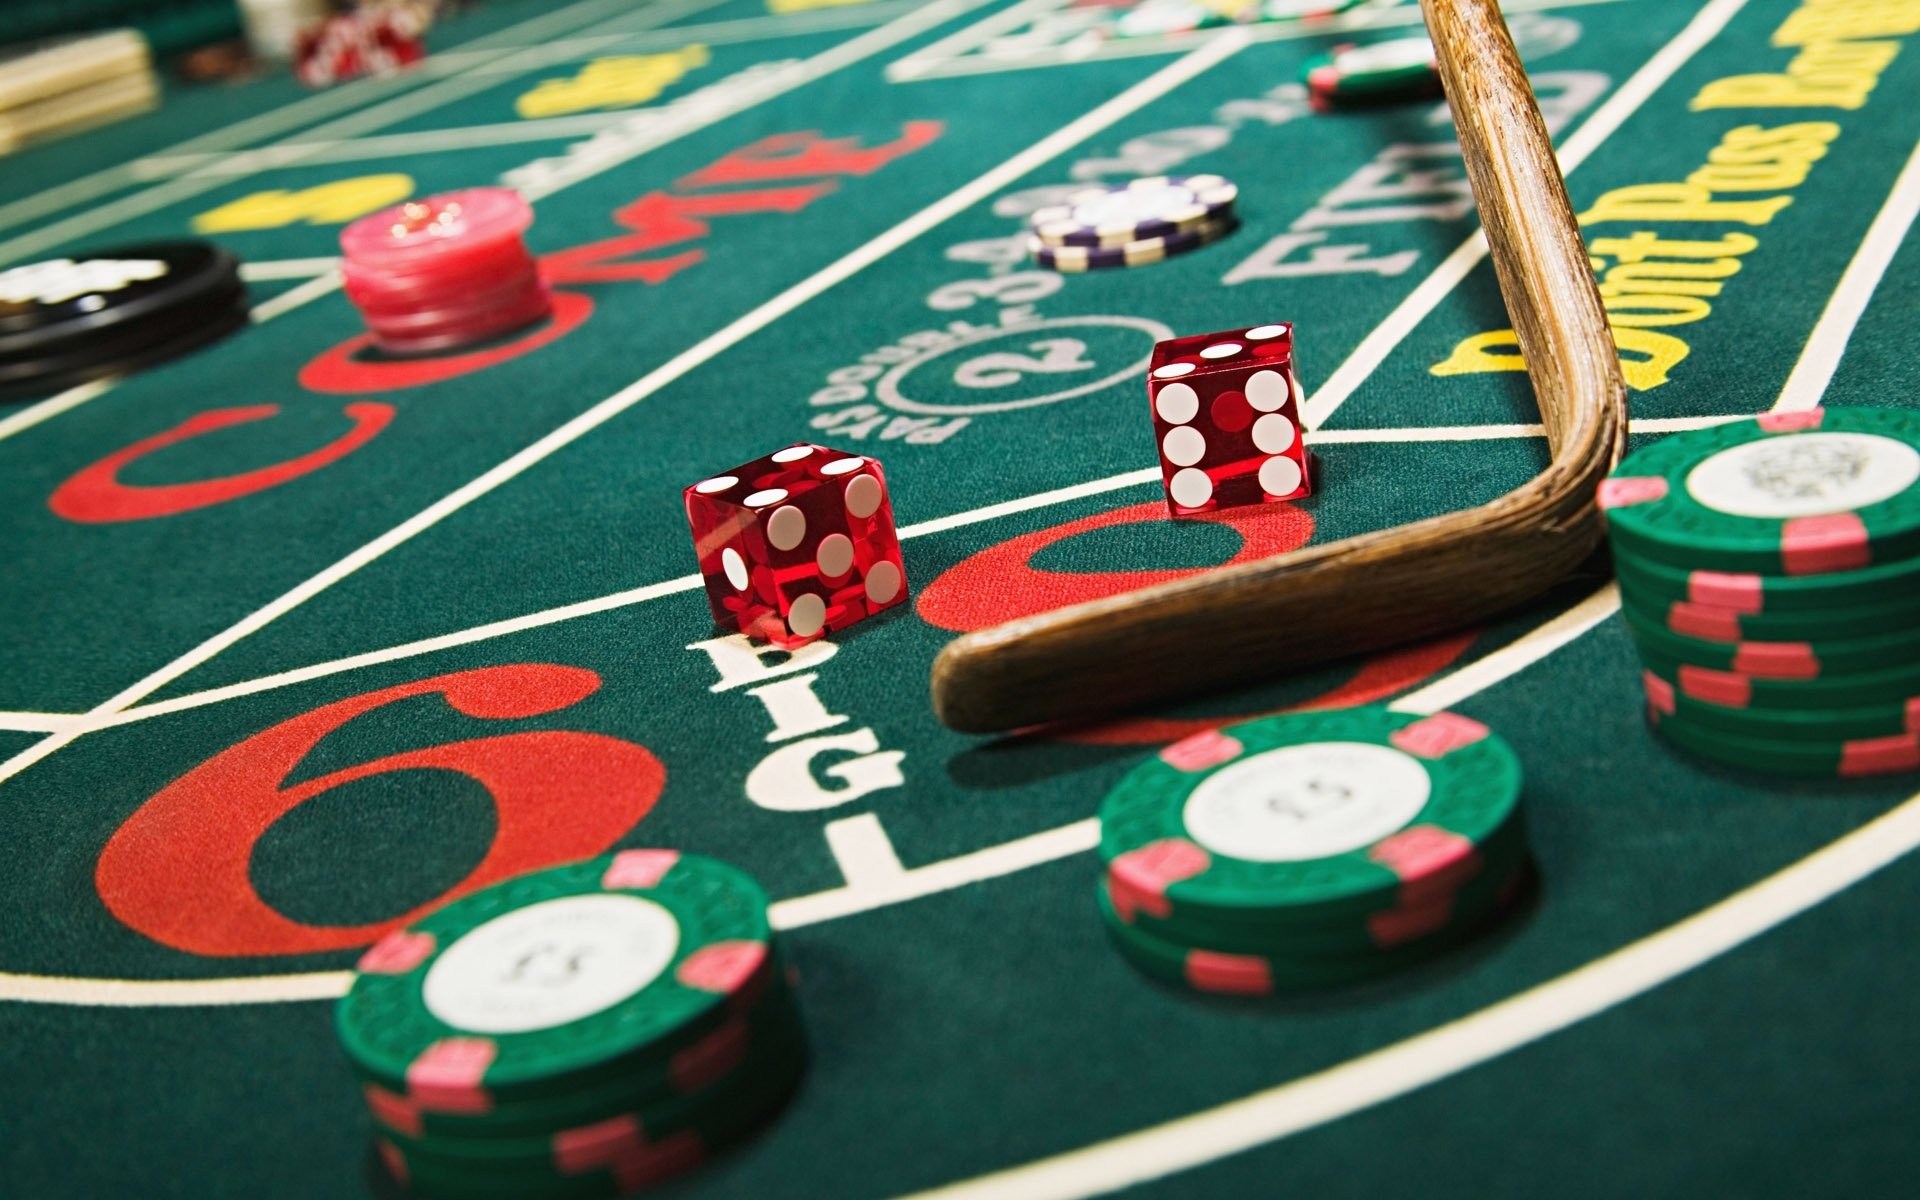 The Psychology Behind Online Casino Games and Addiction